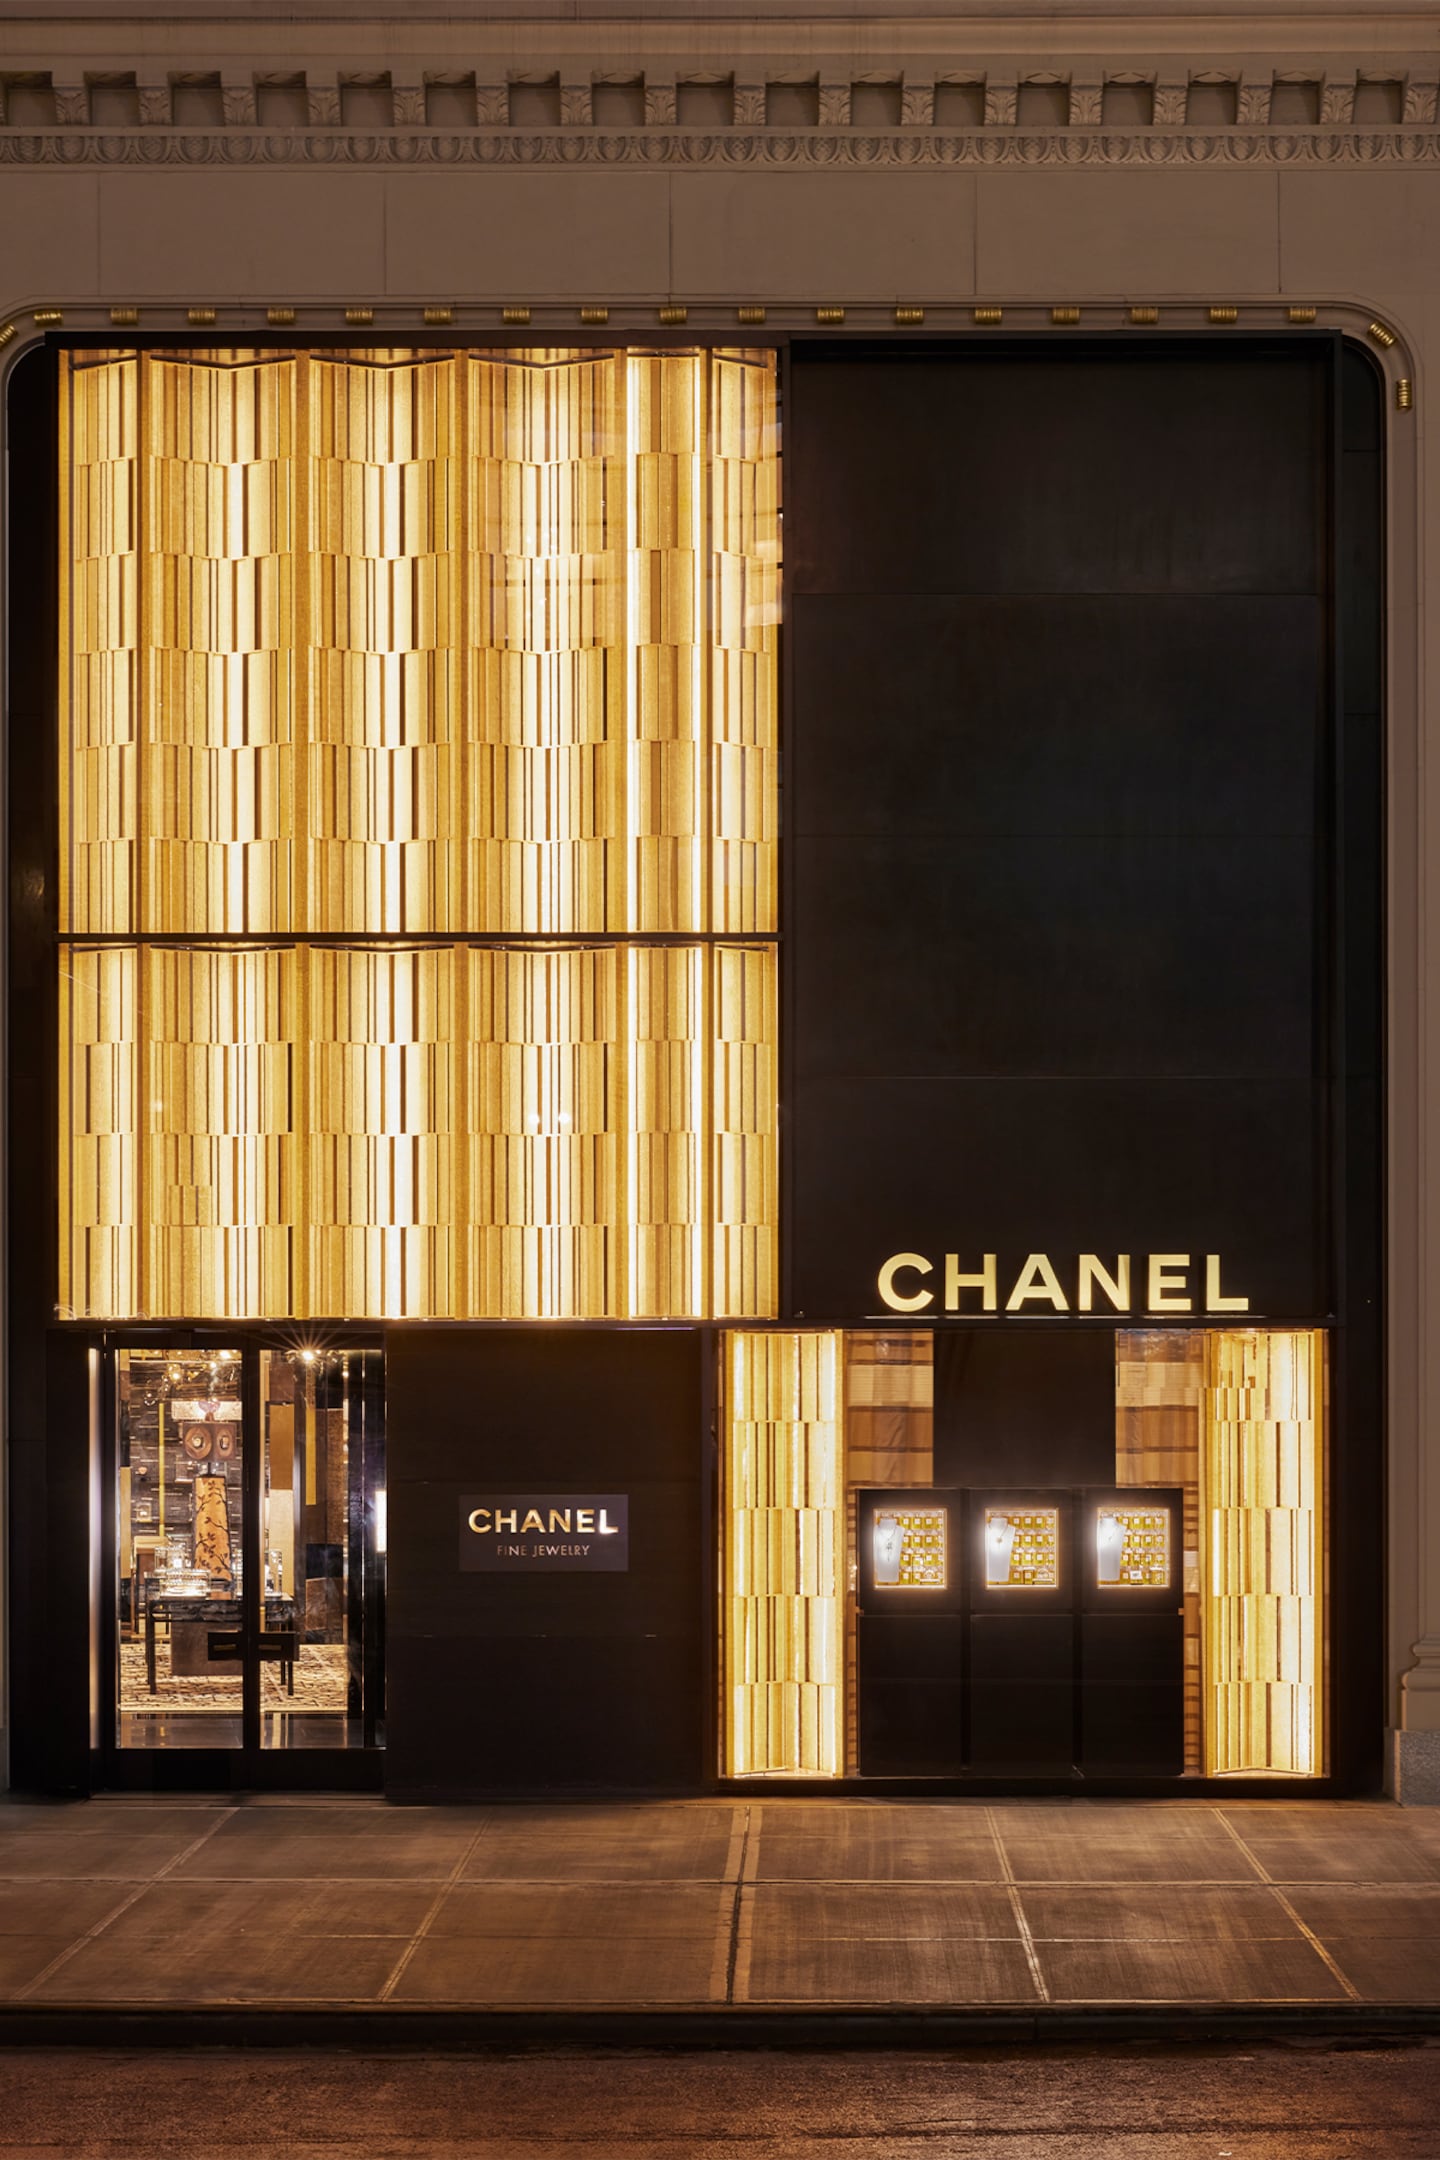 A Chanel storefront